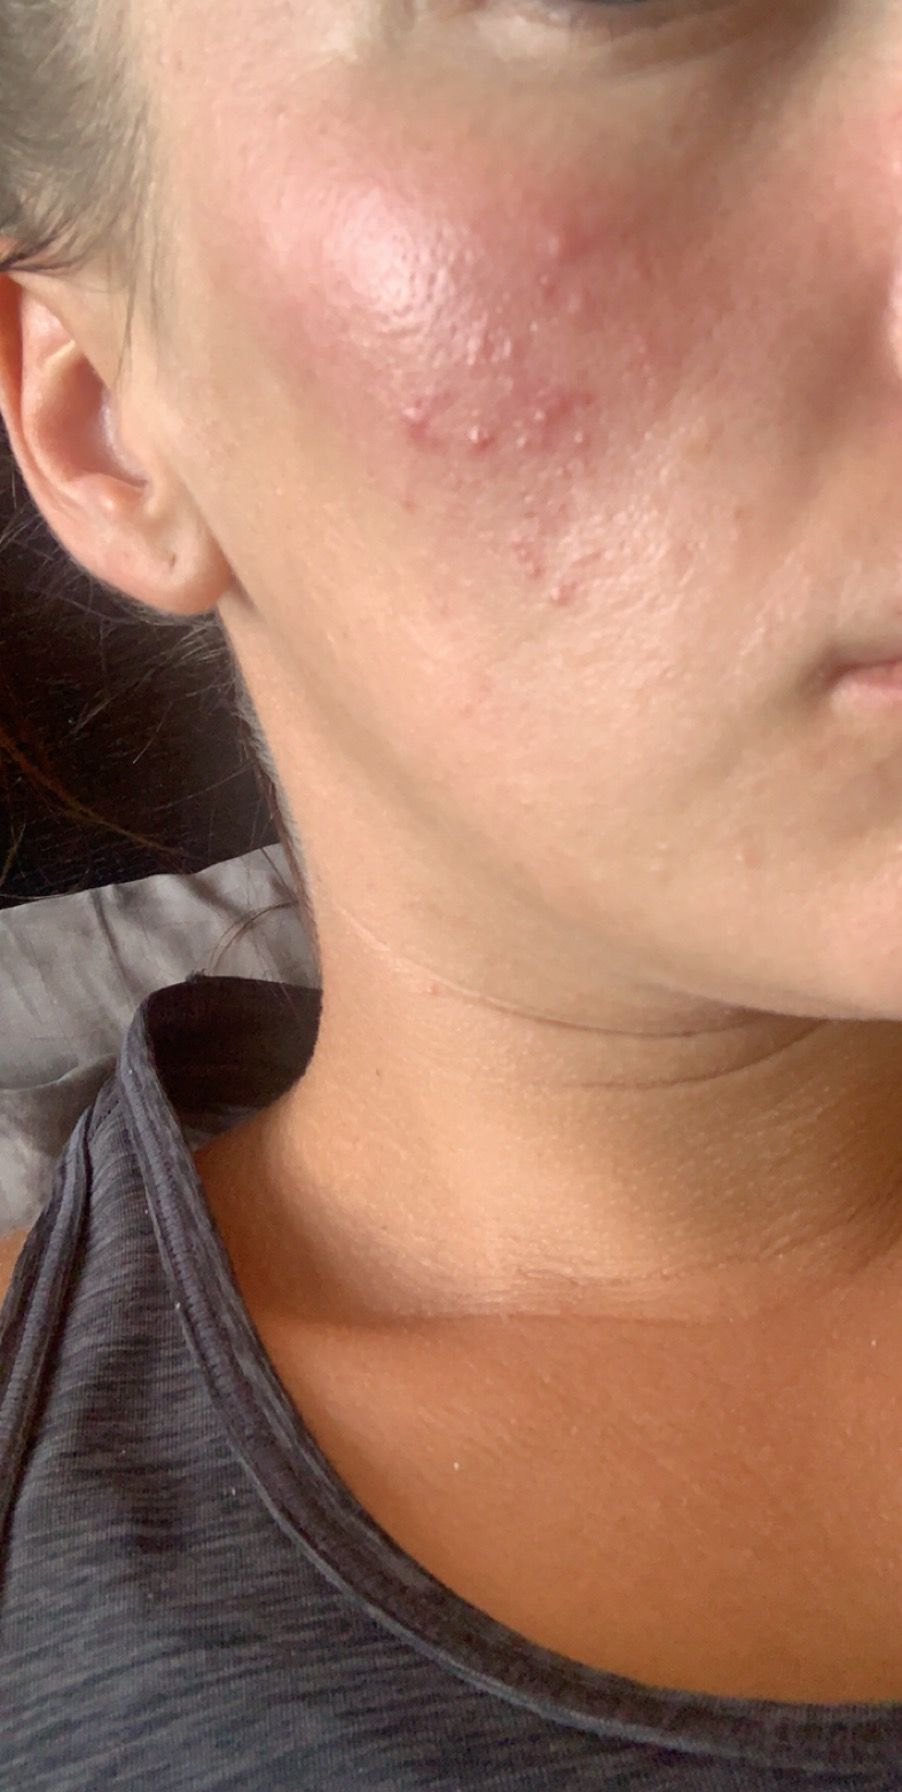 Acne or skin infection? - General acne discussion - Acne.org